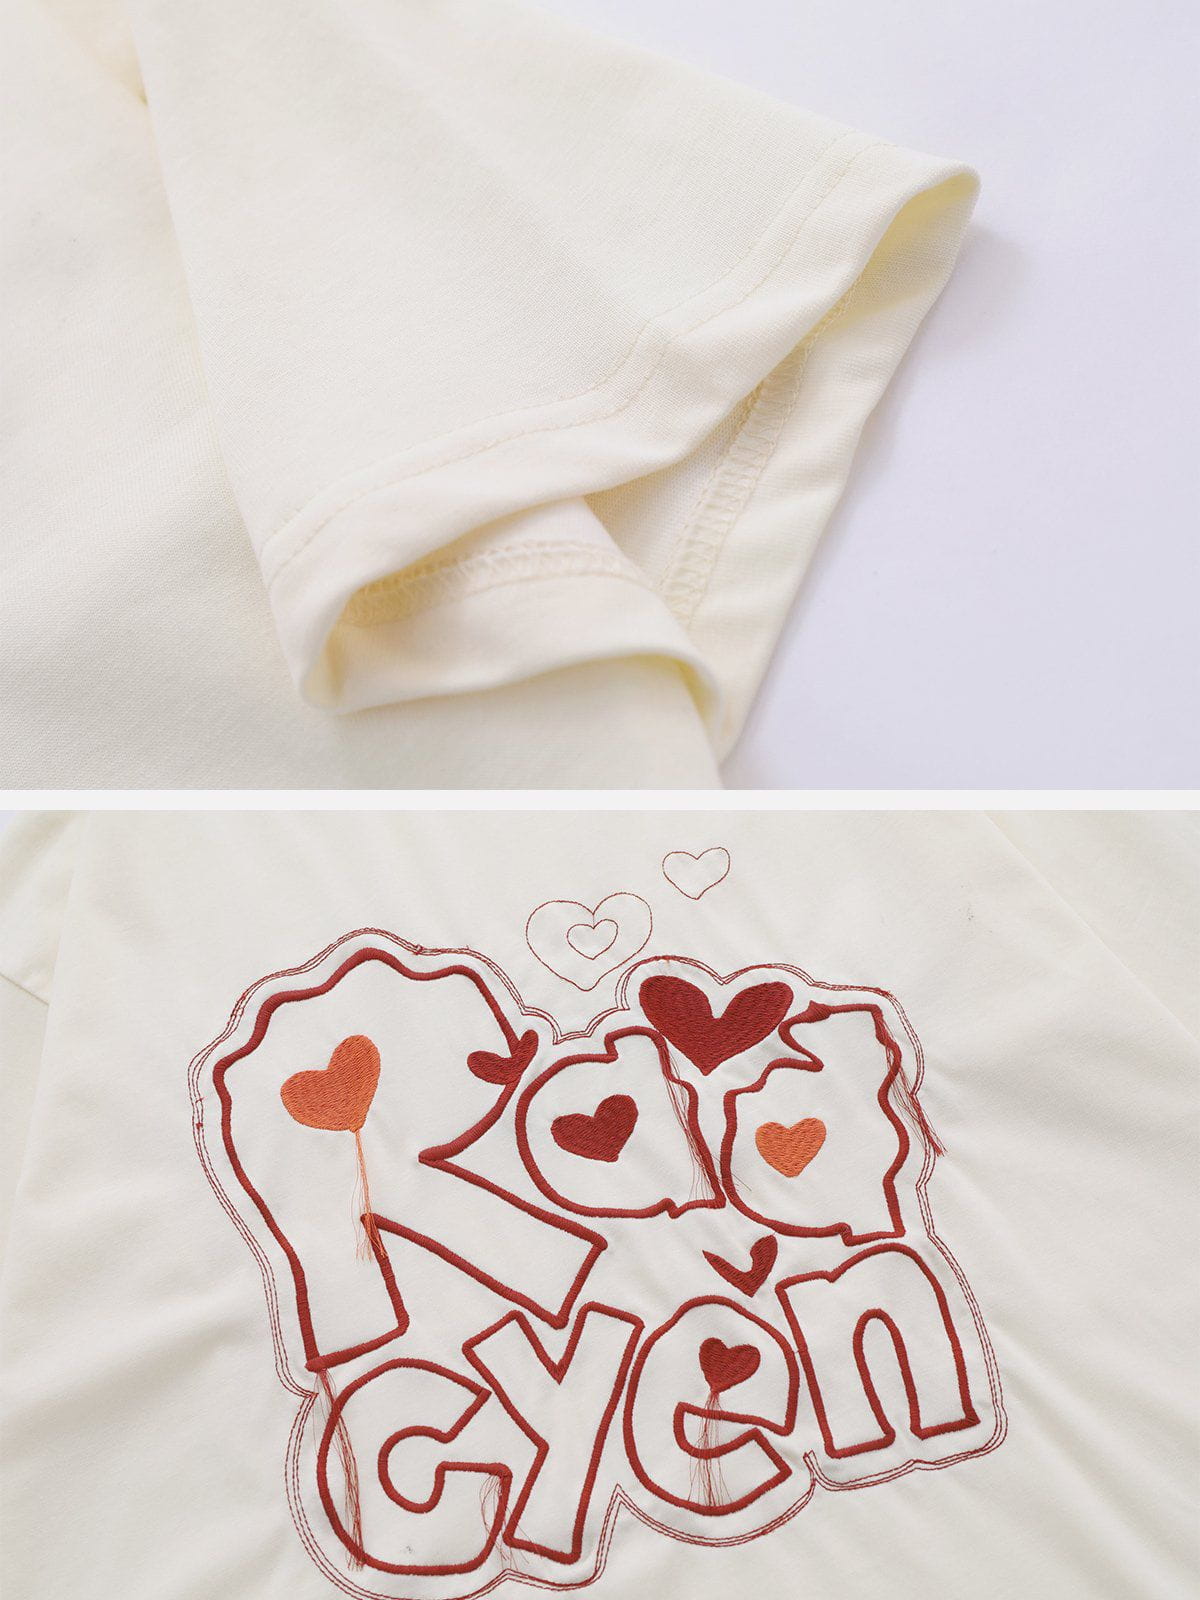 Sneakerland™ - Letter Embroidery Heart Element Tee